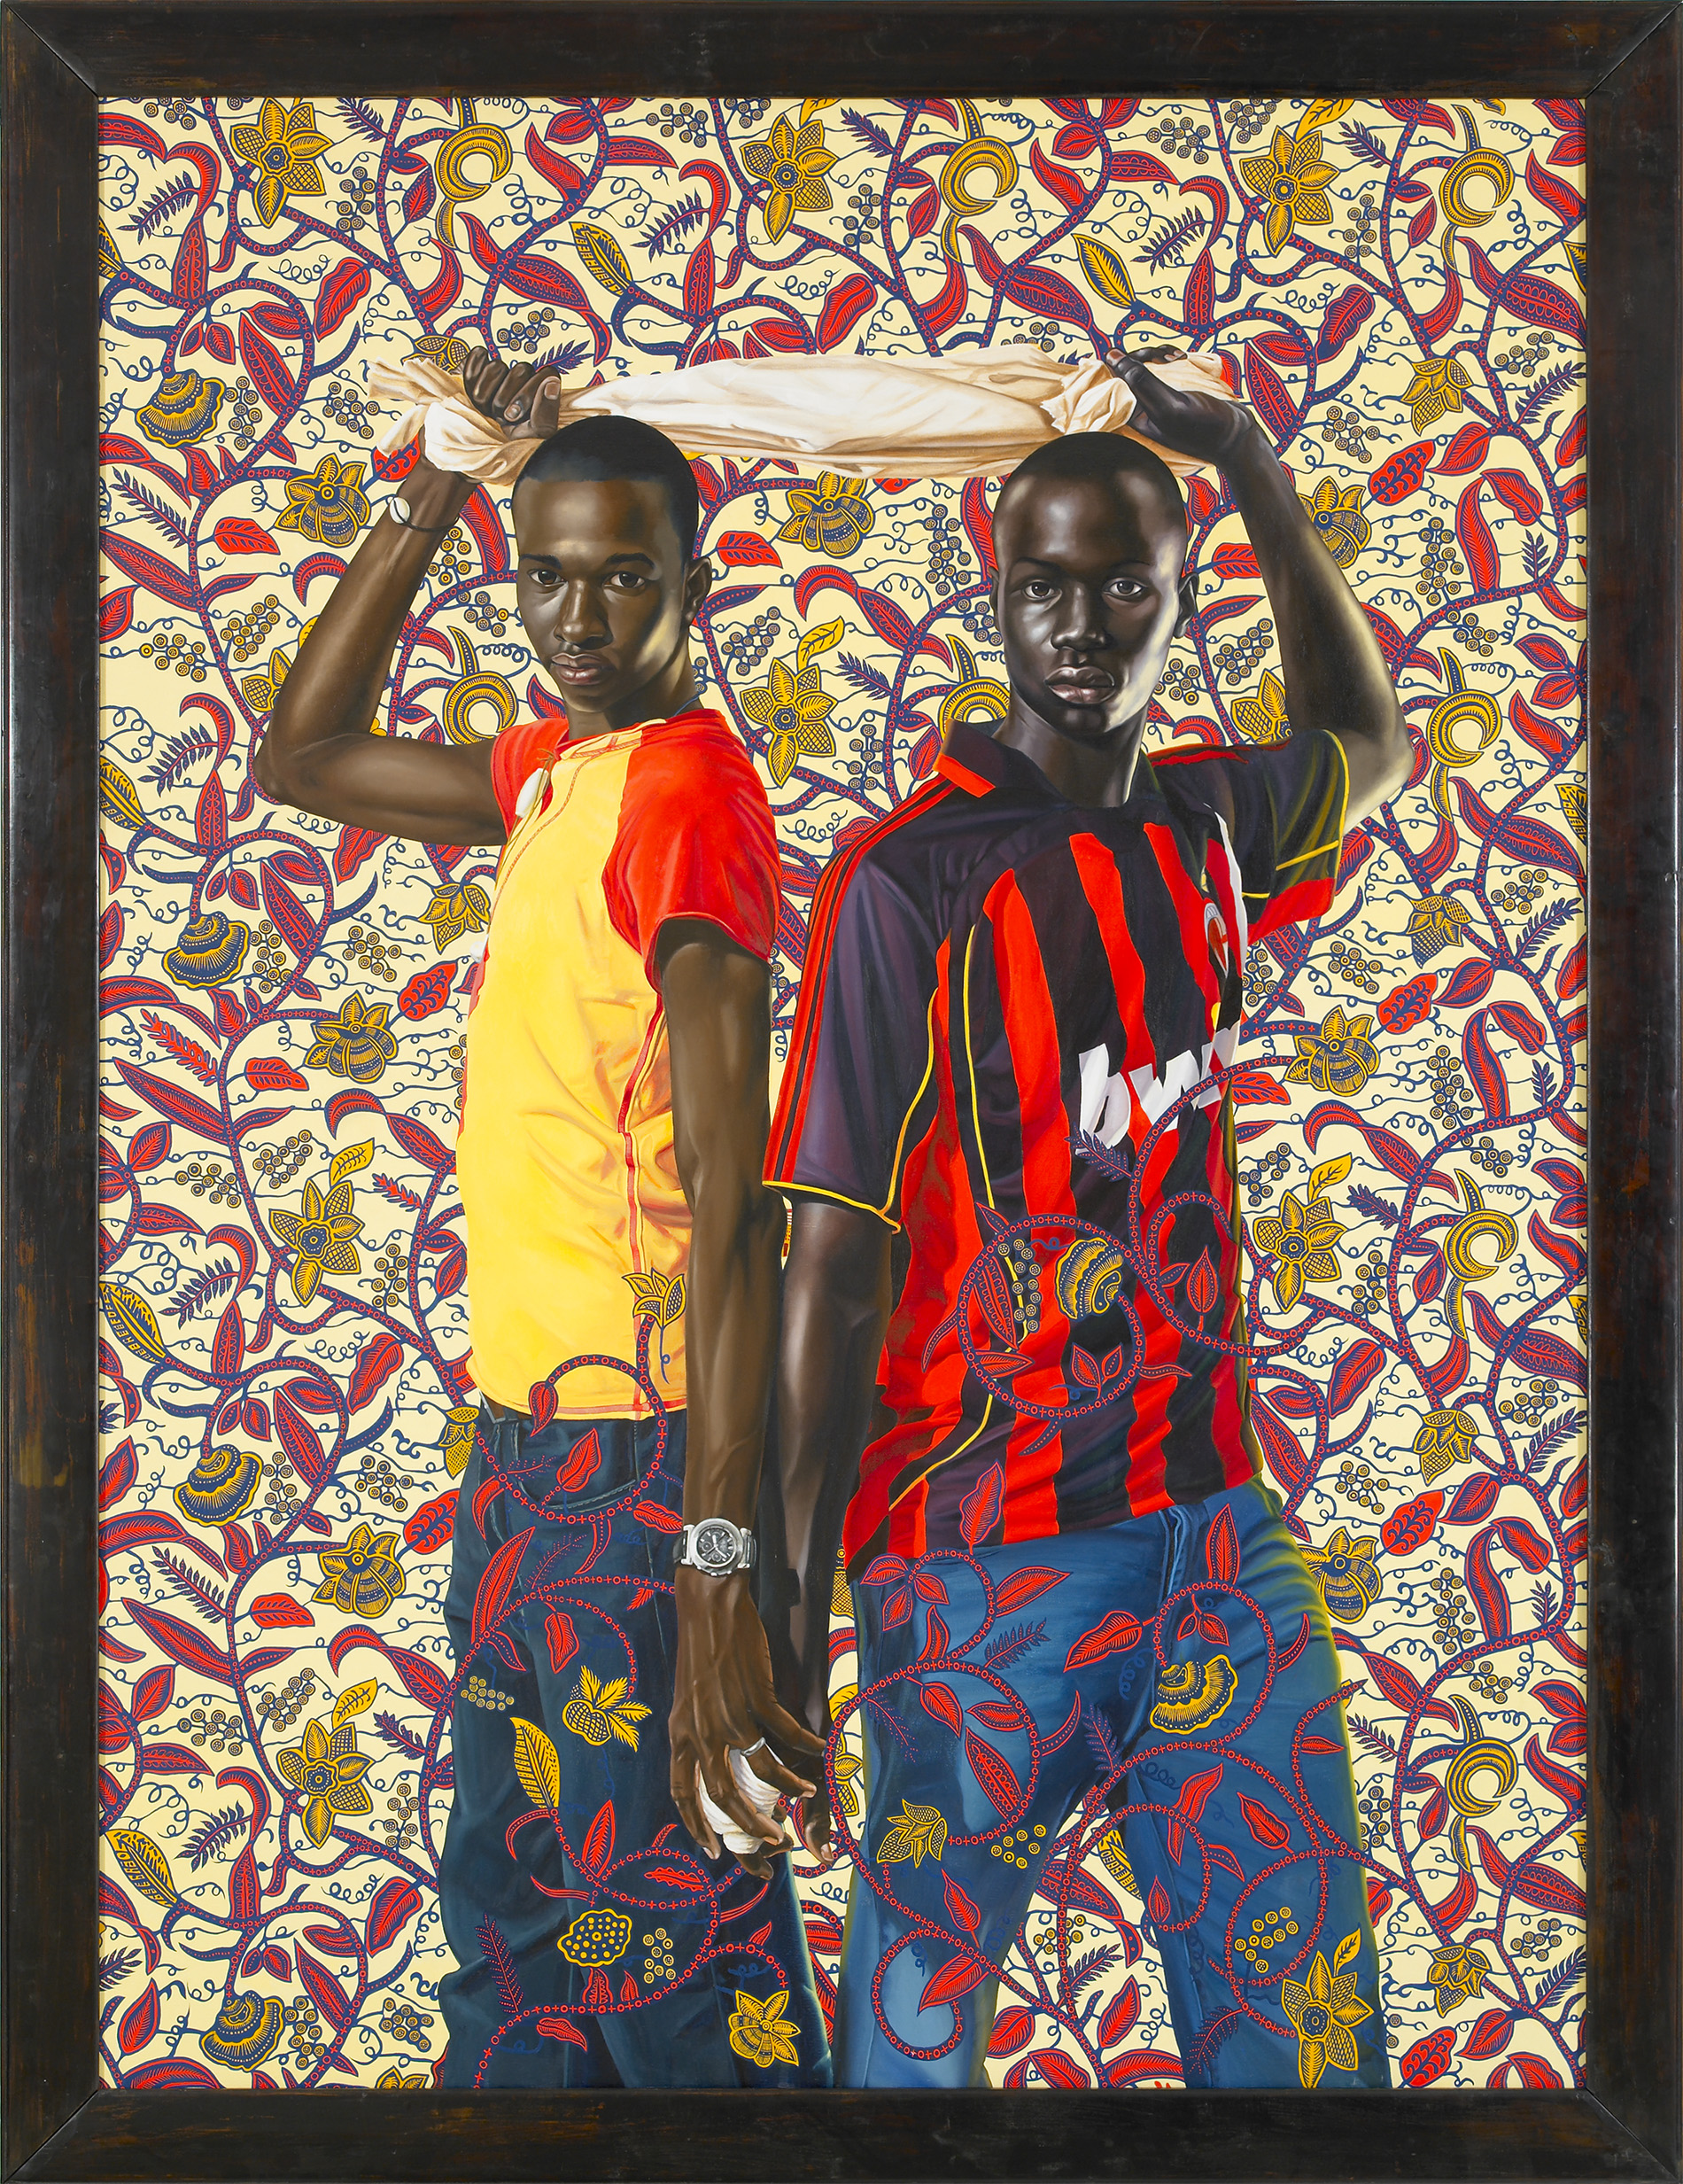 Kehinde Wiley | The World Stage: Lagos & Dakar | Place Soweto (National Assembly), 2008 Oil on Canvas. | 5